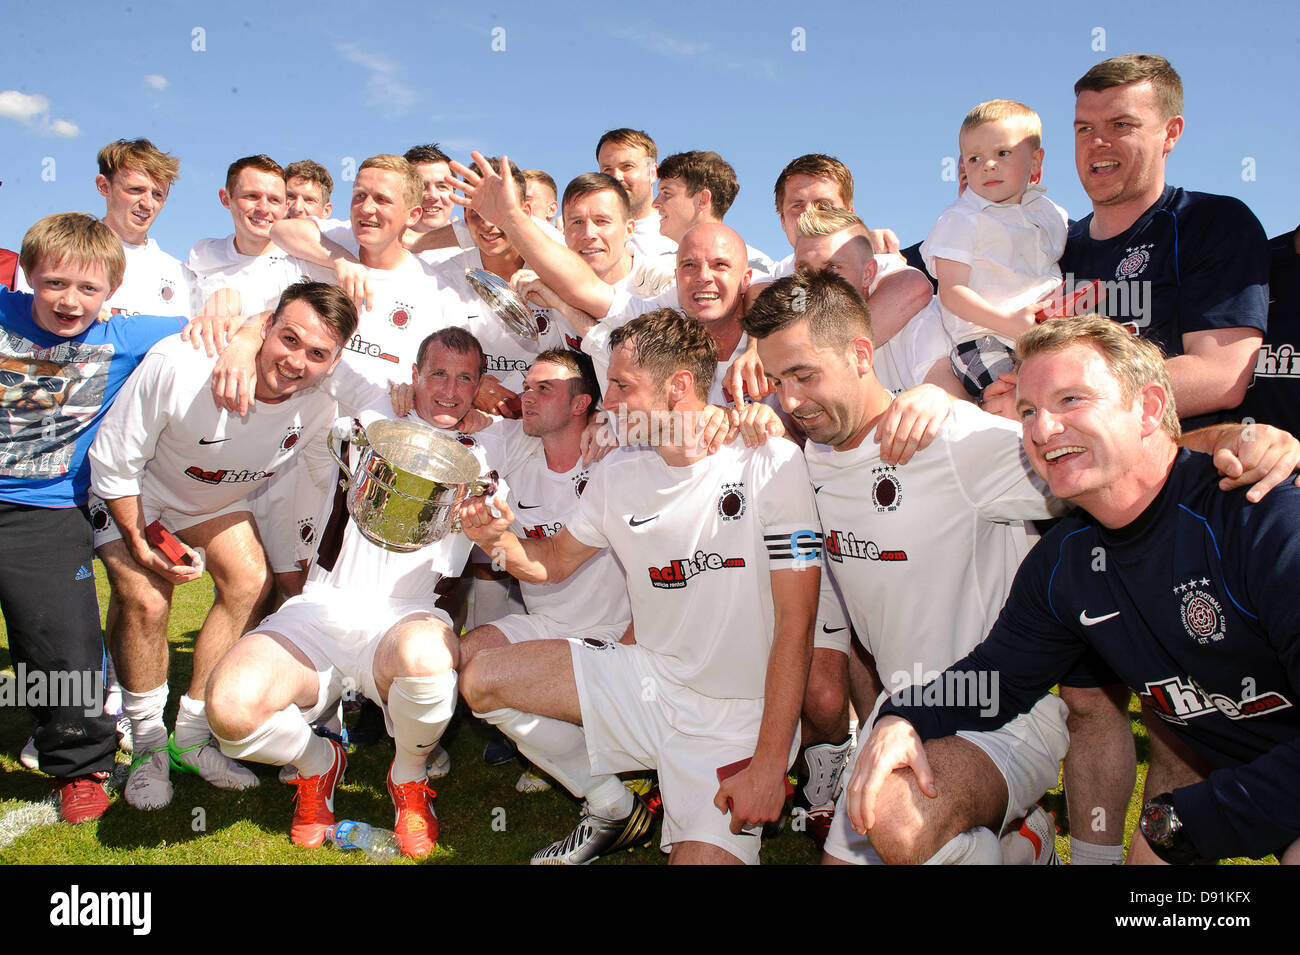 Bathgate, West Lothian, Scotland, UK. Saturday 8th June 2013. Linlithgow celebrate lifting the Cup during the Fife & Lothians Cup Final, Linlithgow Rose v Camelon at Creamery Park, Bathgate. Credit: Colin Lunn/Alamy Live News Stock Photo